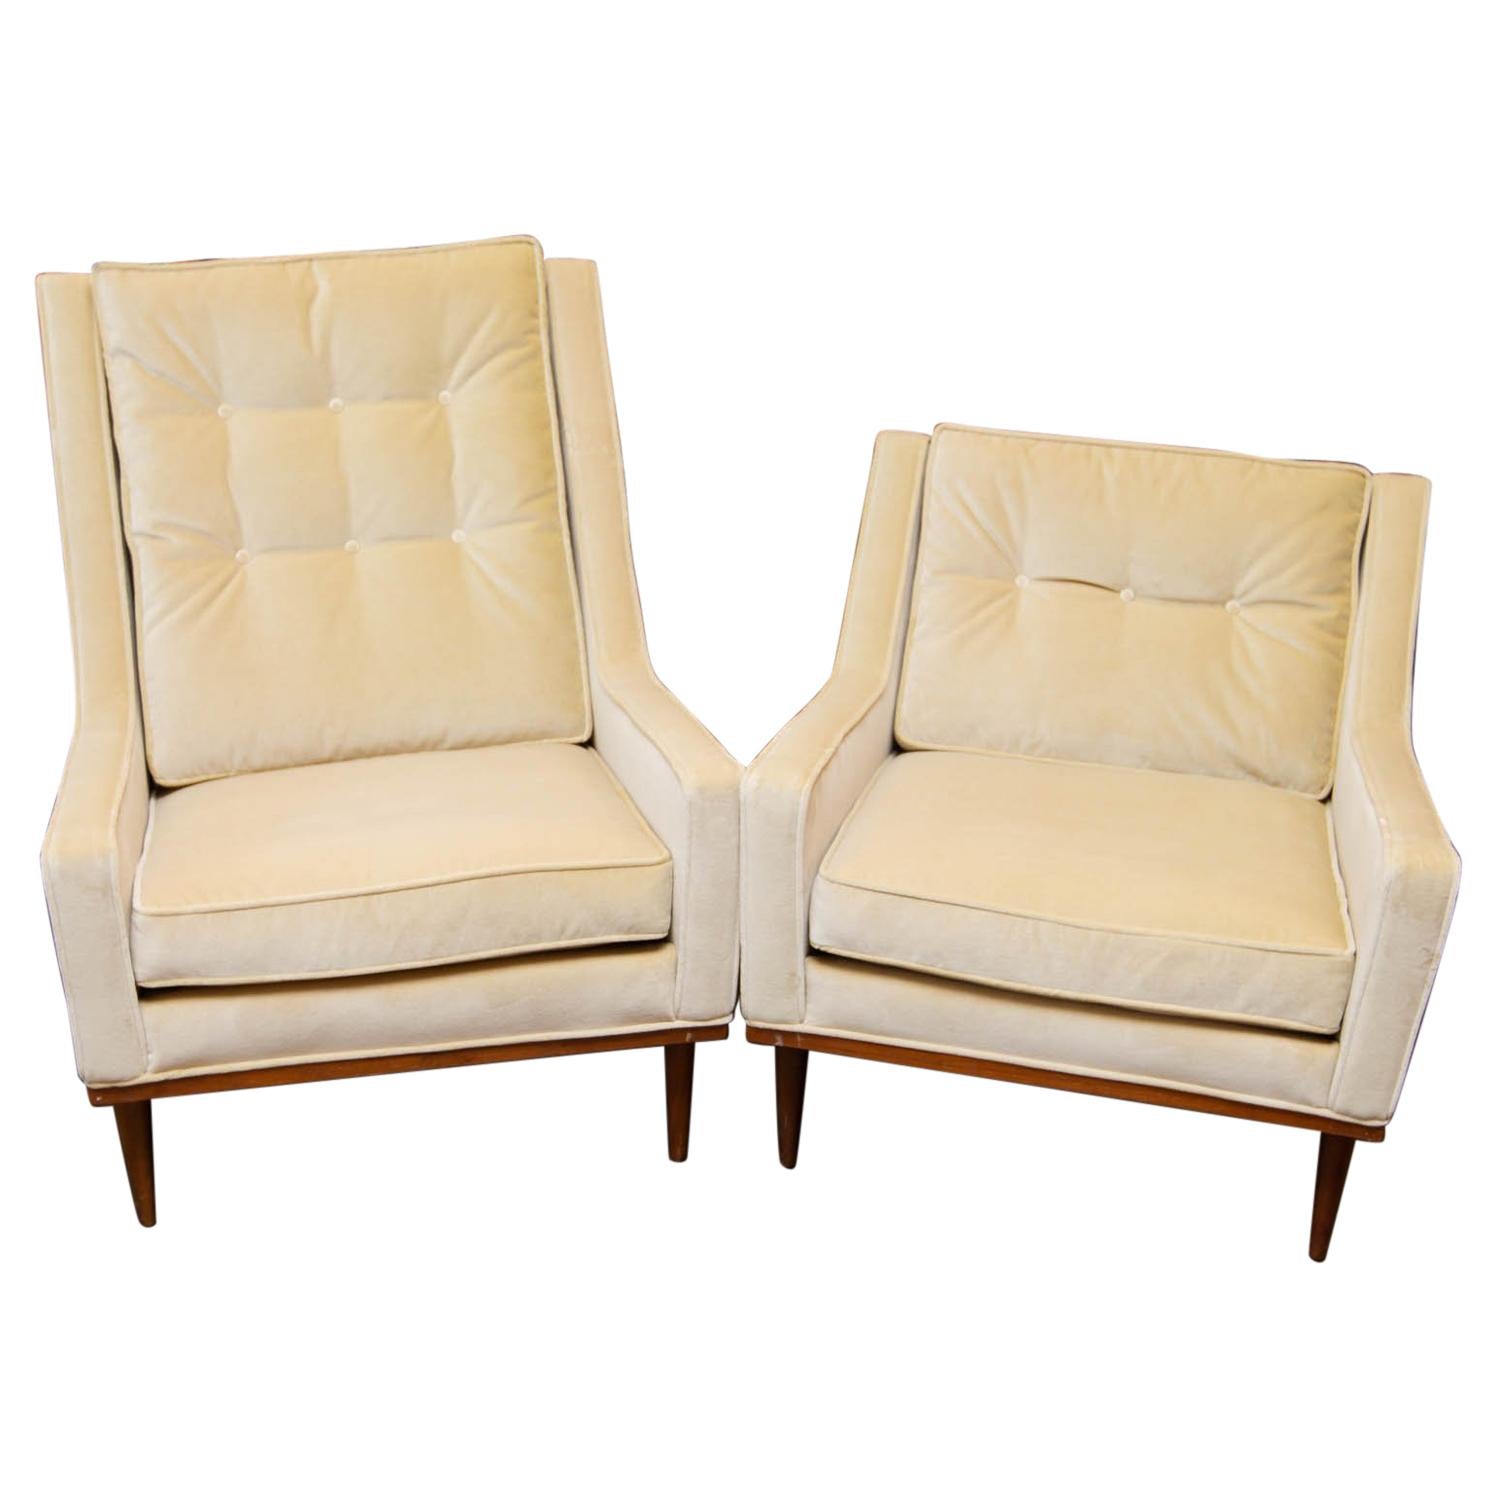 Milo Baughman King and Queen Chairs for James Inc